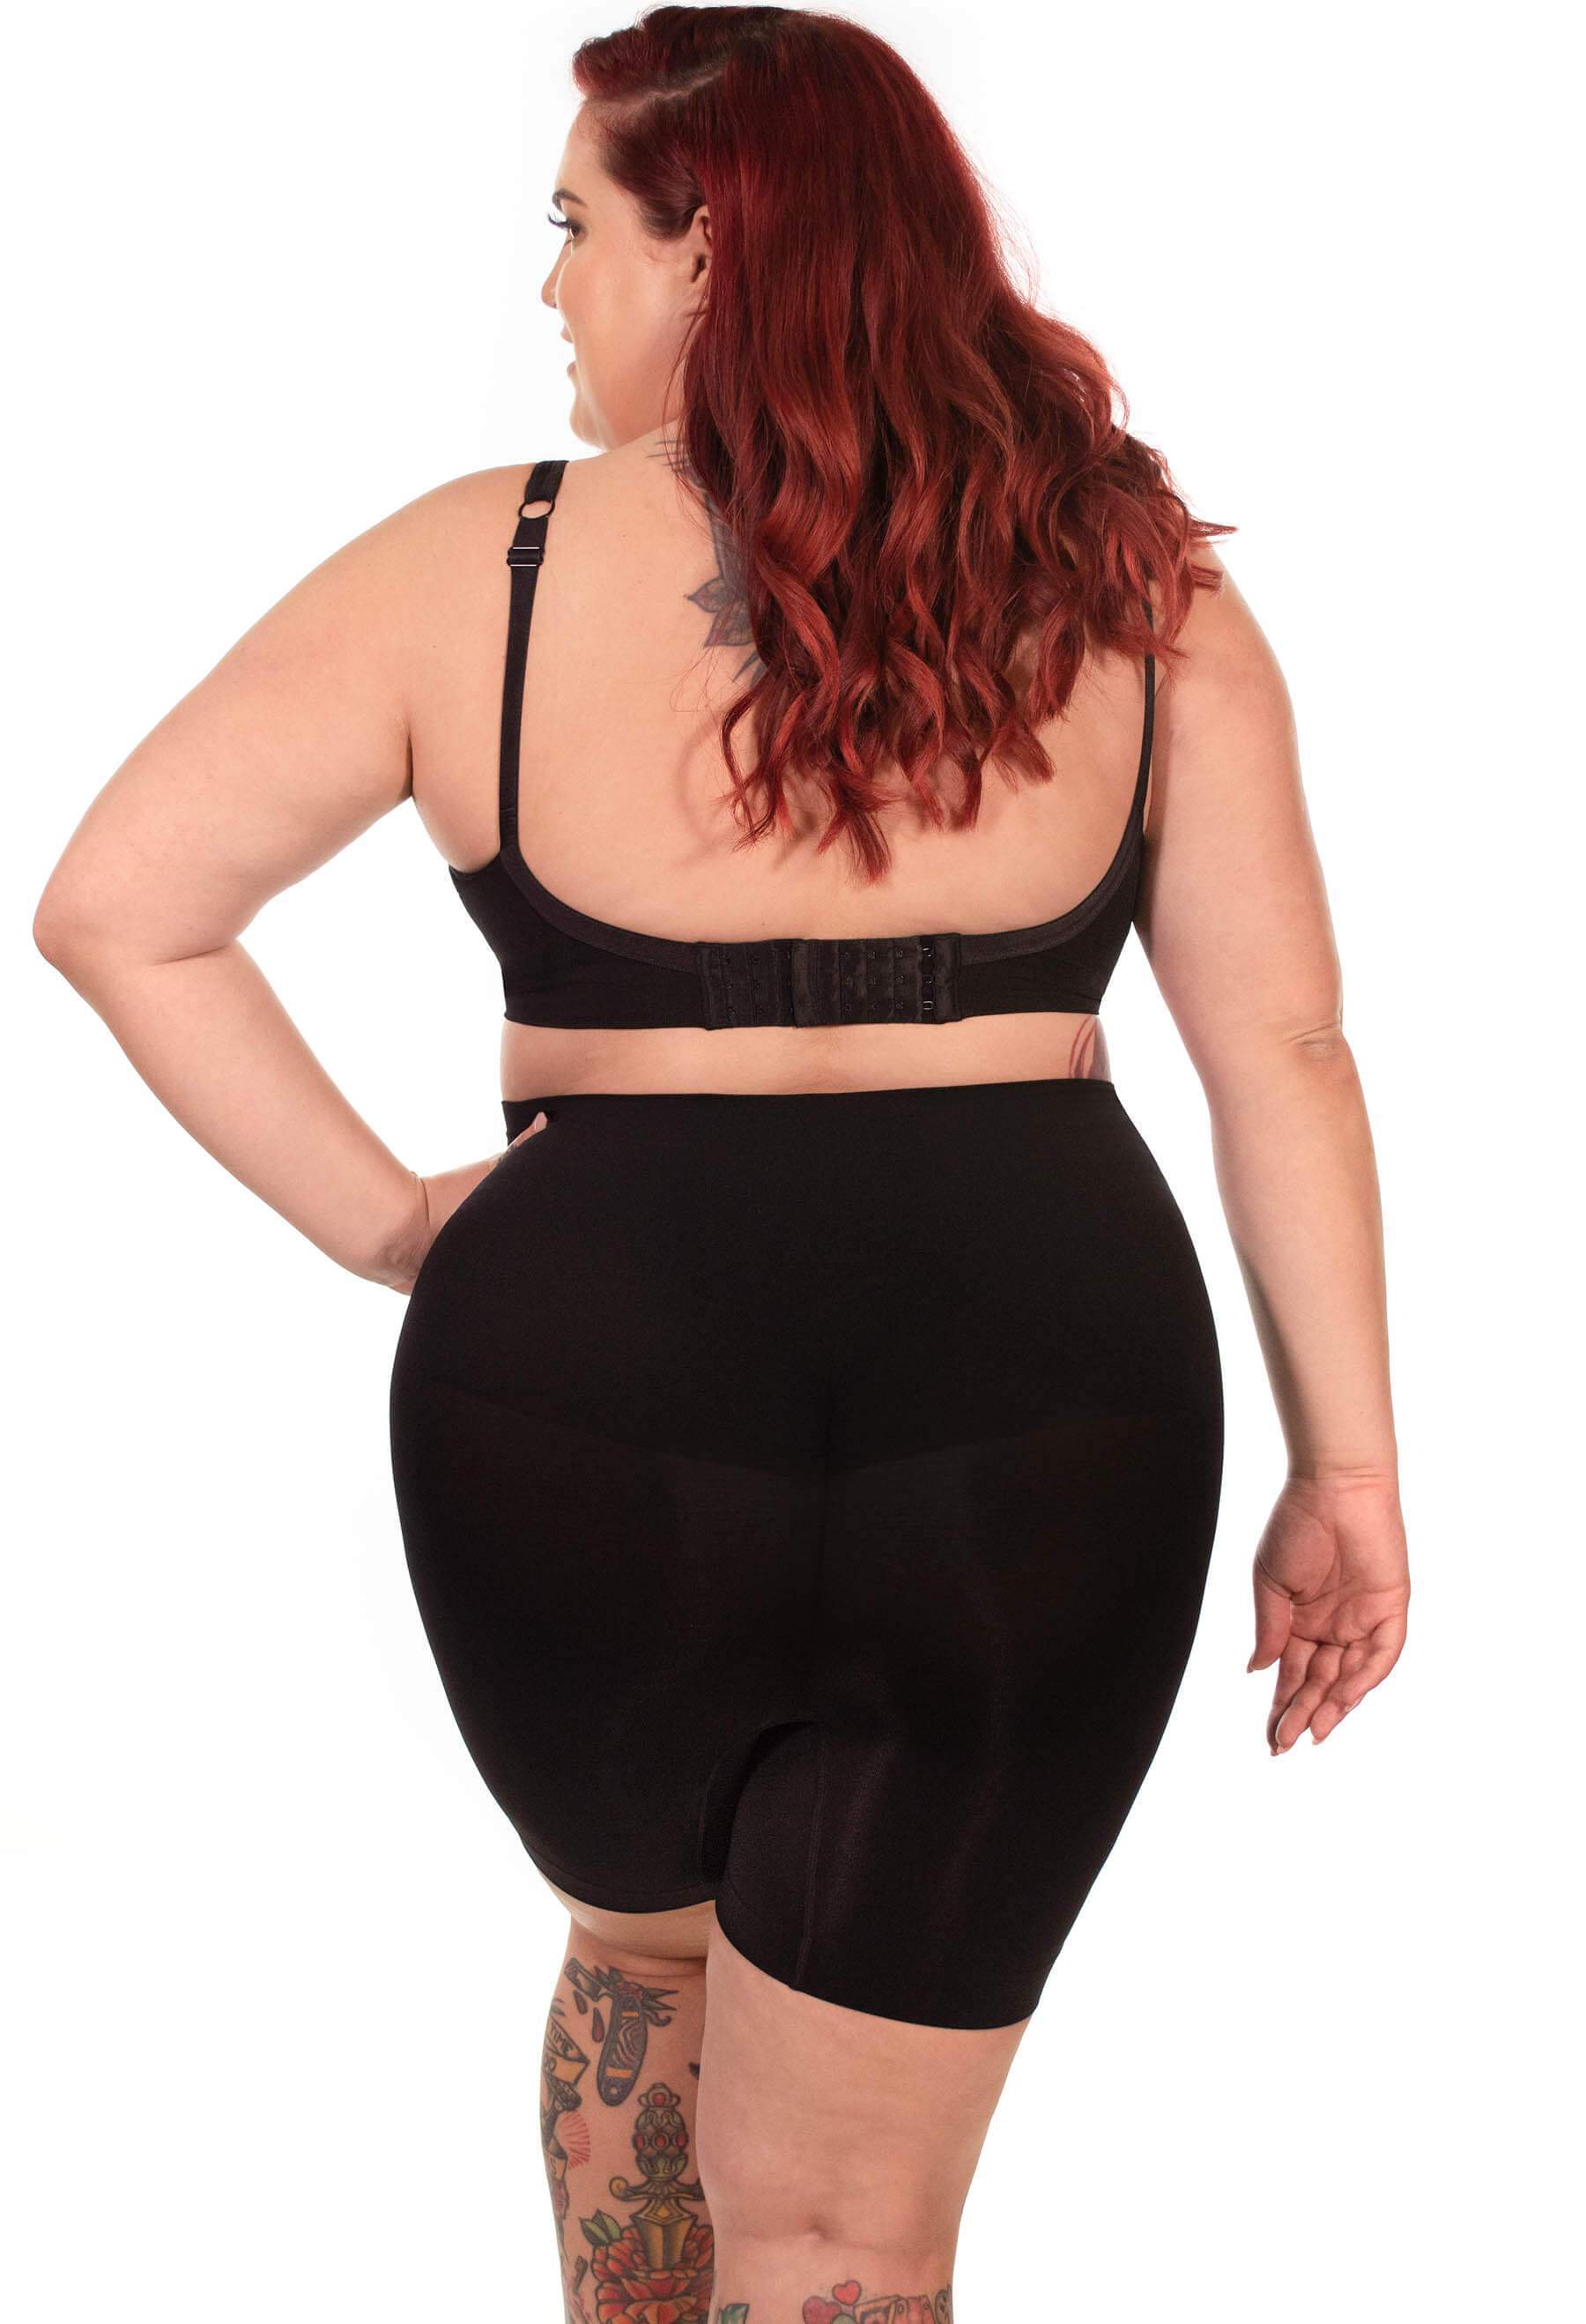 seamless black neutral shaper shorts that minimises a muffin top because of super high waist band